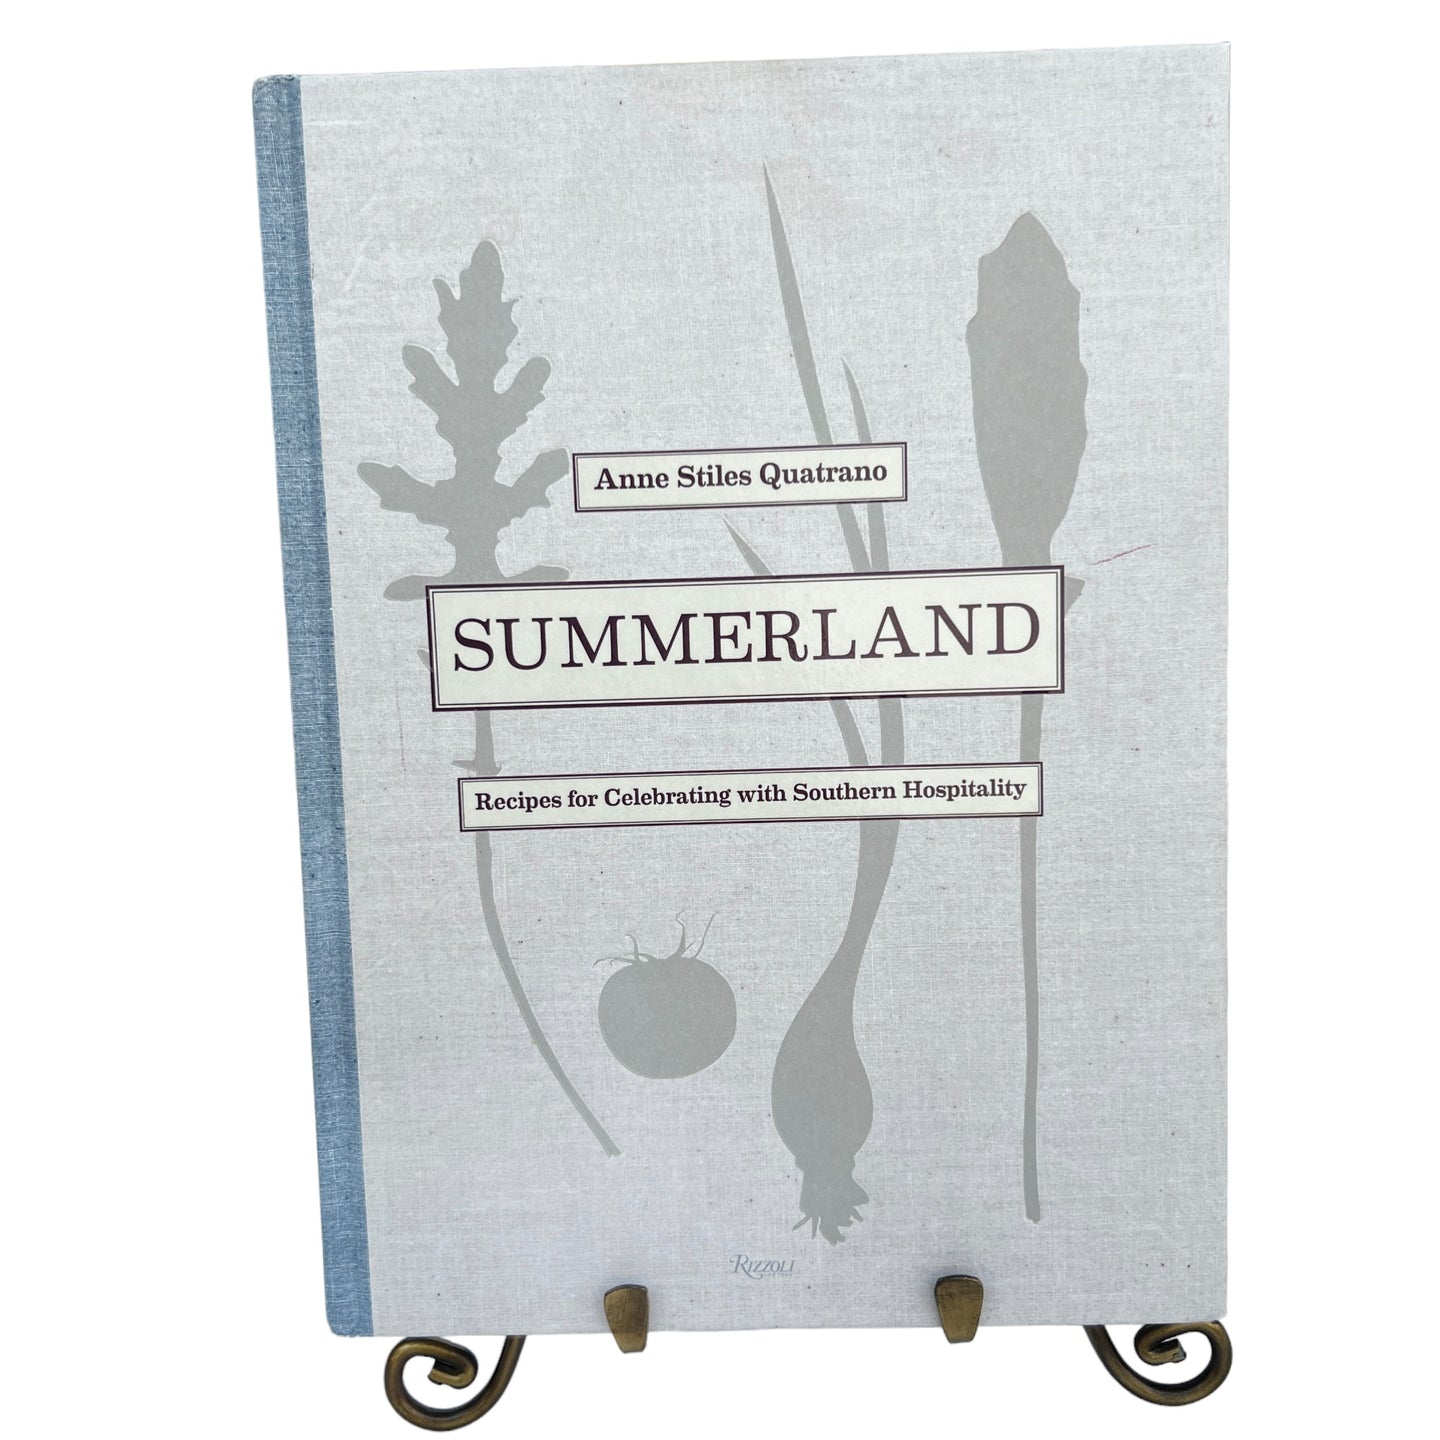 Summerland Recipe for Celebrating with Southern Hospitality